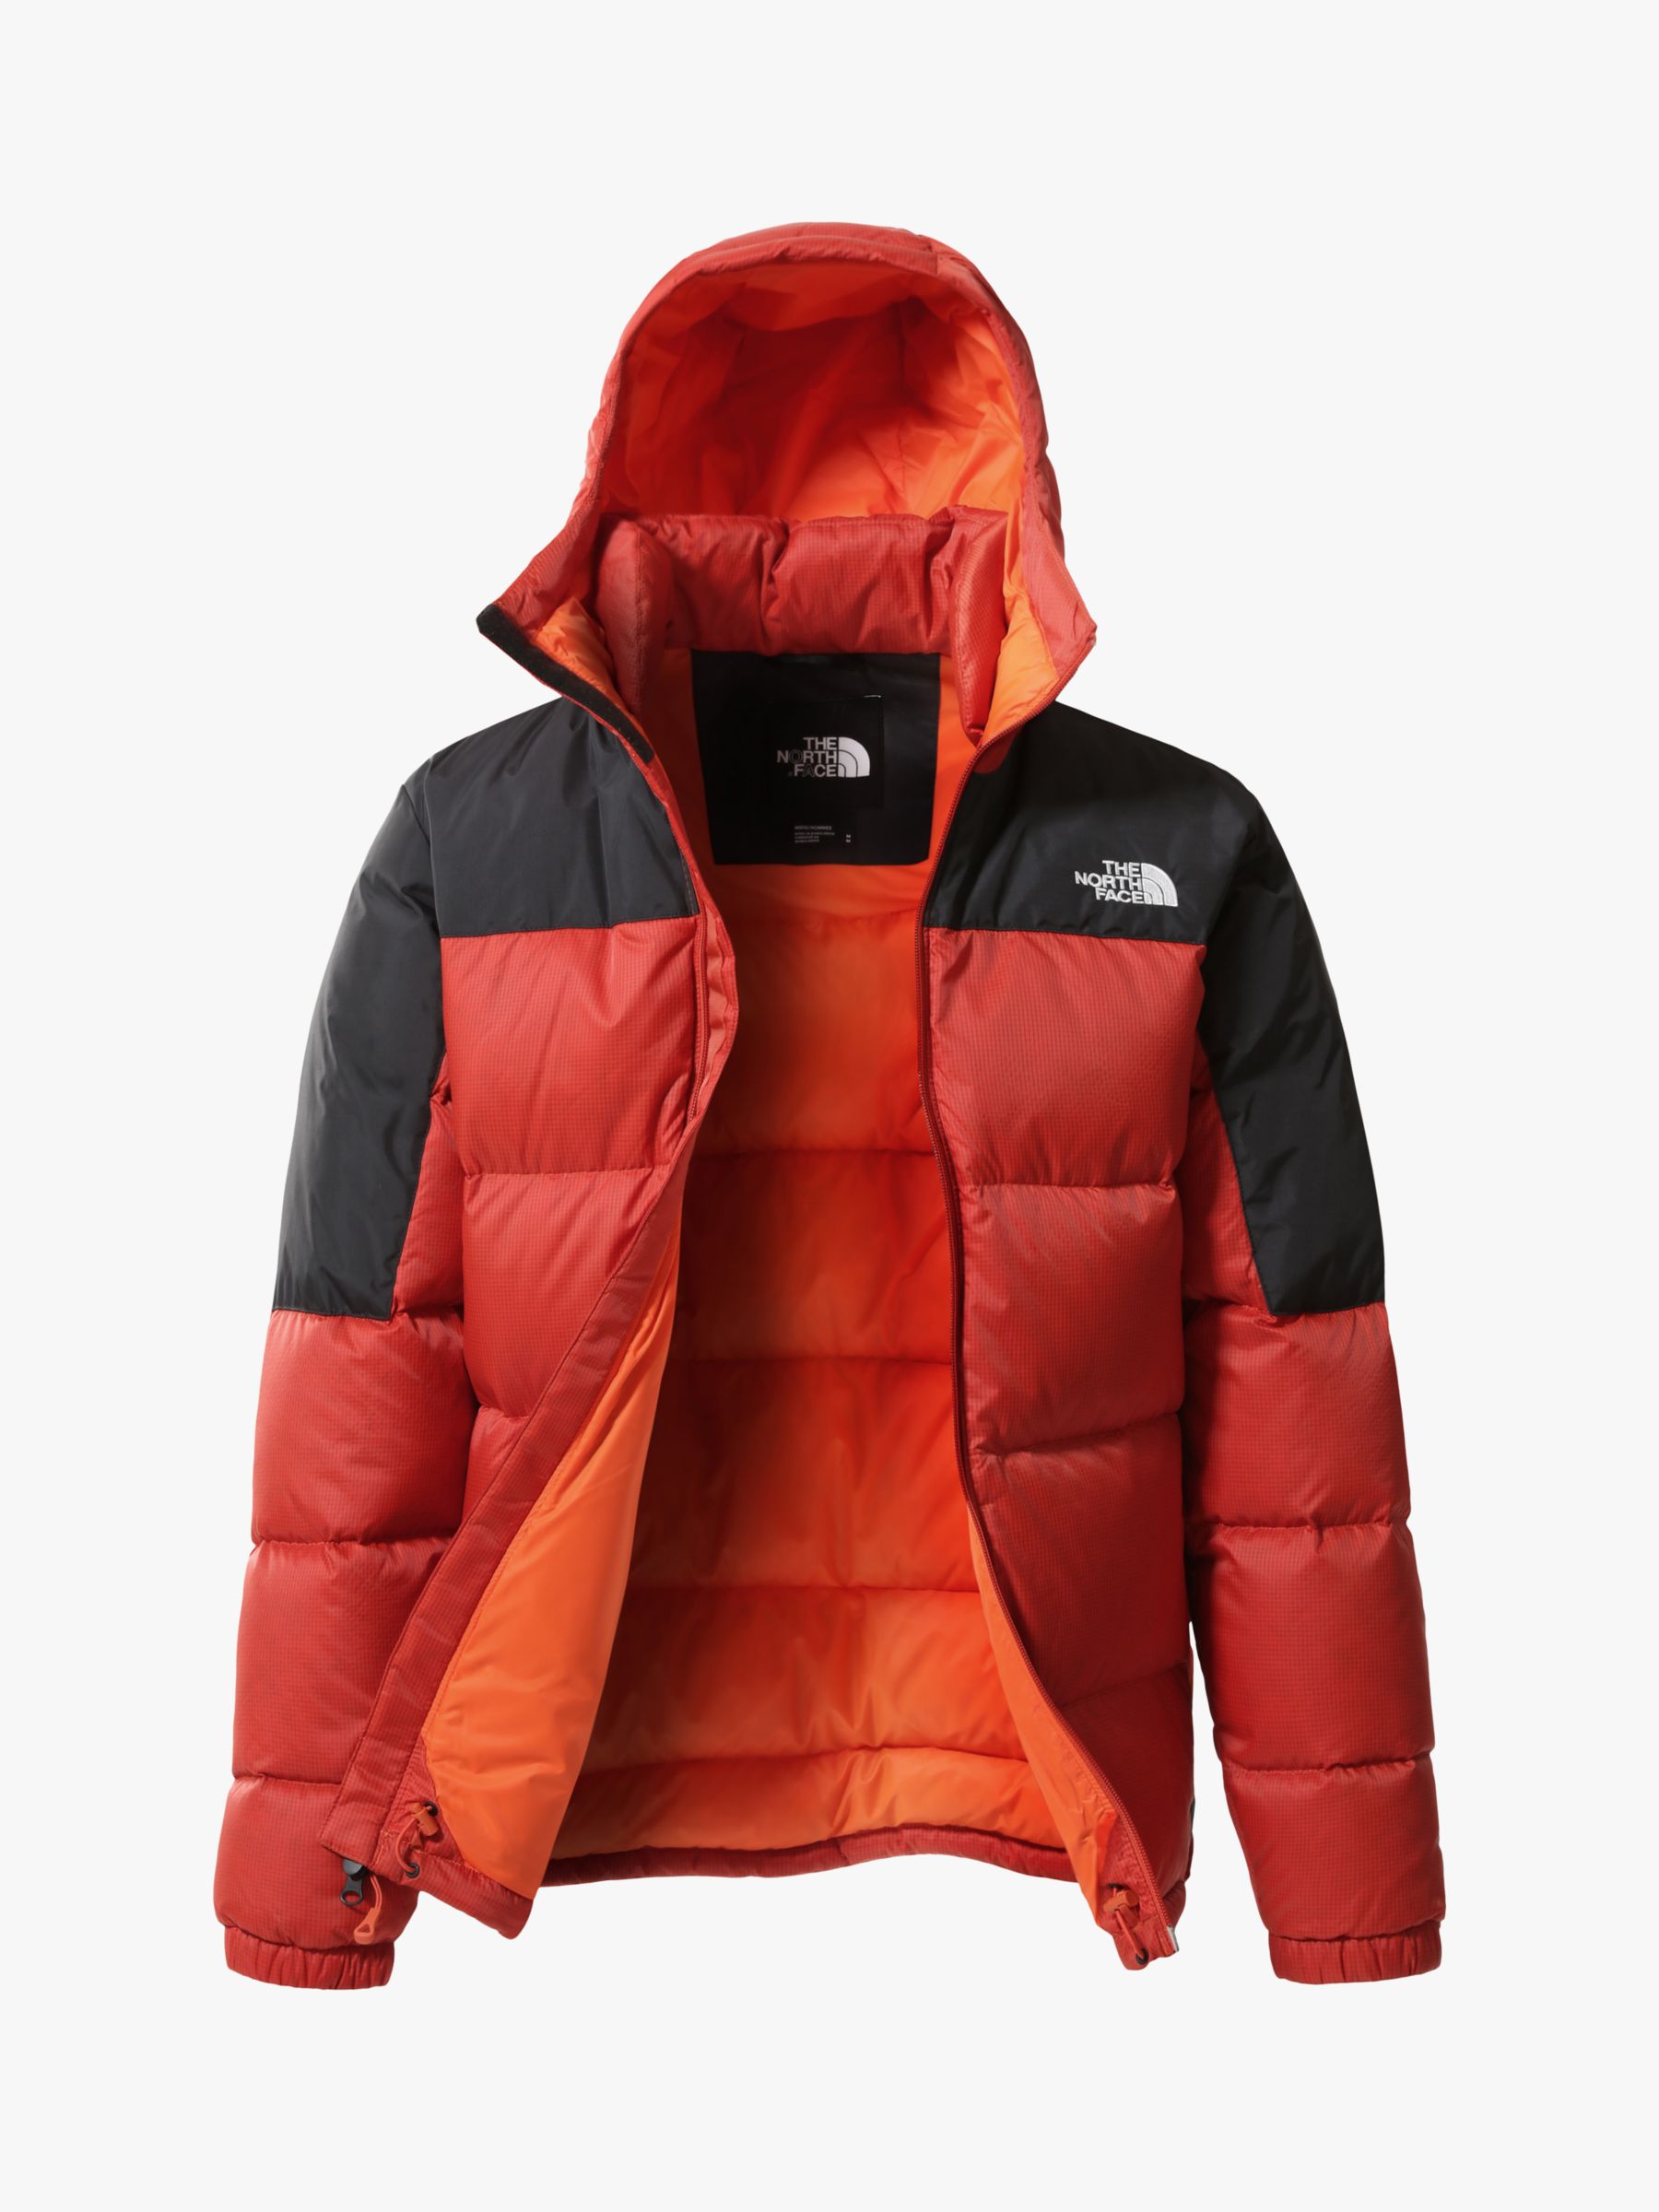 The North Face Diablo Down Men's Hooded Jacket